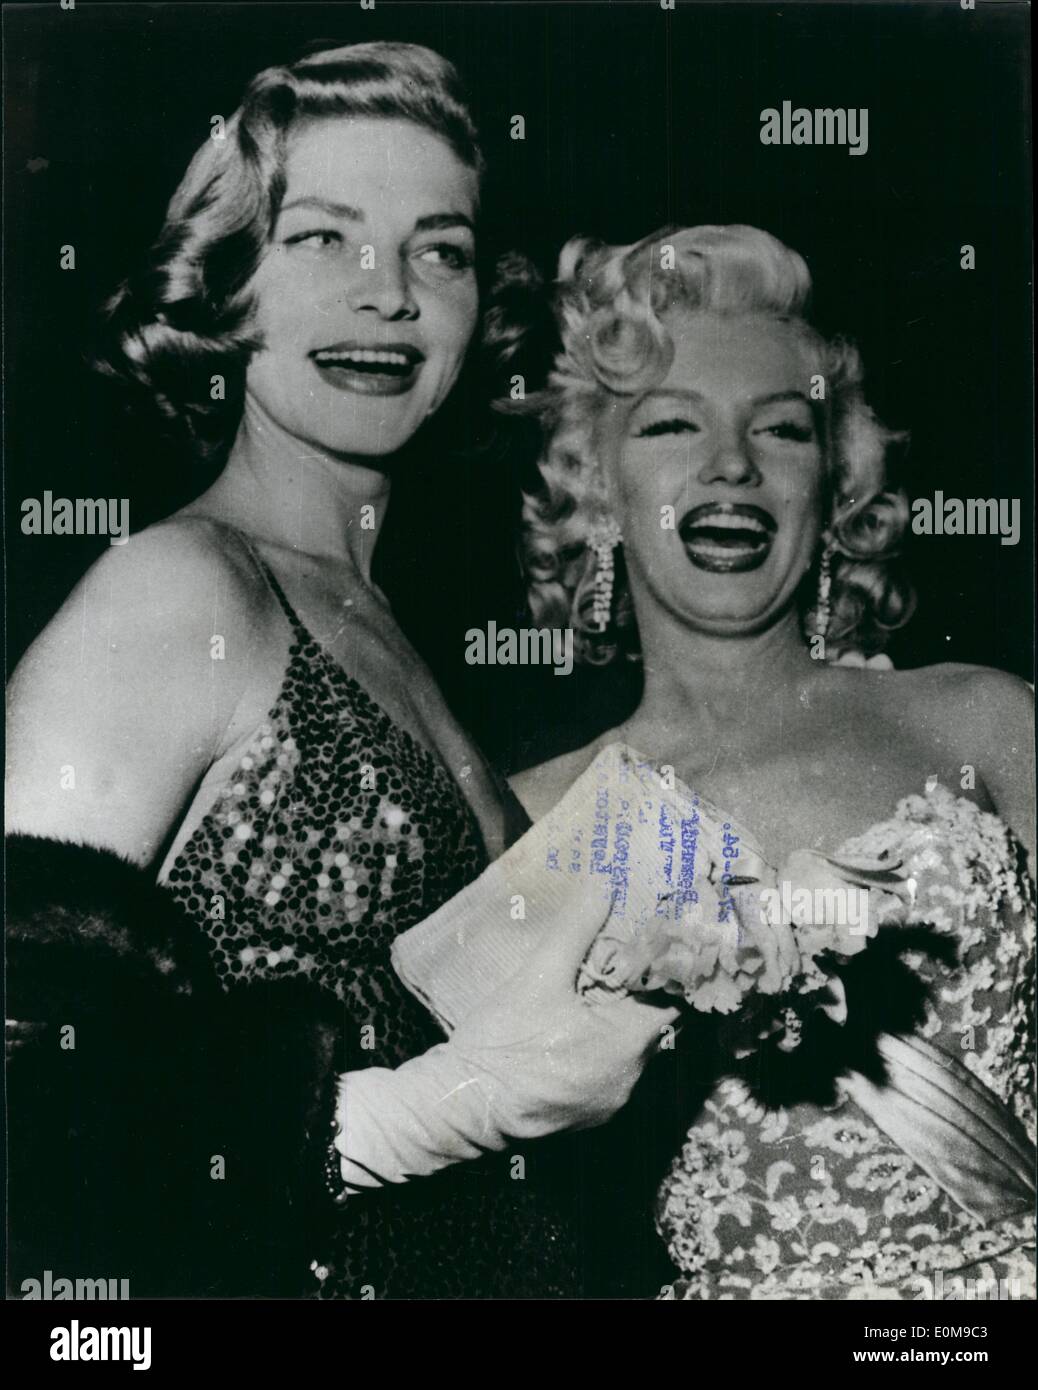 Mar. 03, 1954 - Smiling stars: Beautiful Marilyn Monroe (right) and her equally famous film star friend, Lauren Bacall, were in Stock Photo